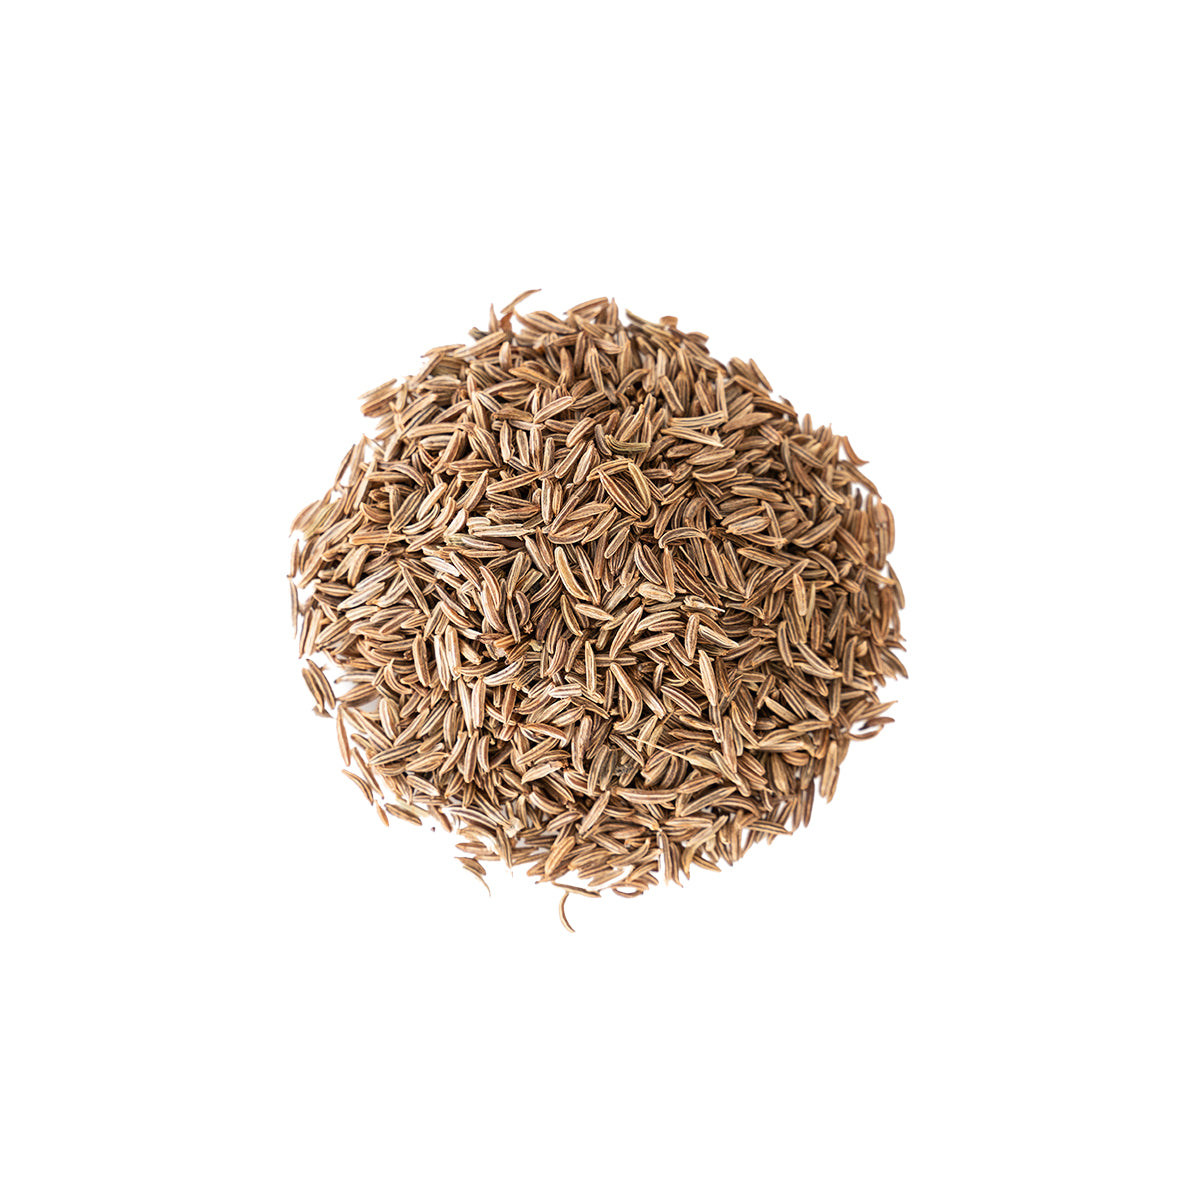 Smallflower Caraway Seed - Whole (Carum carvi) (4 oz) #11237